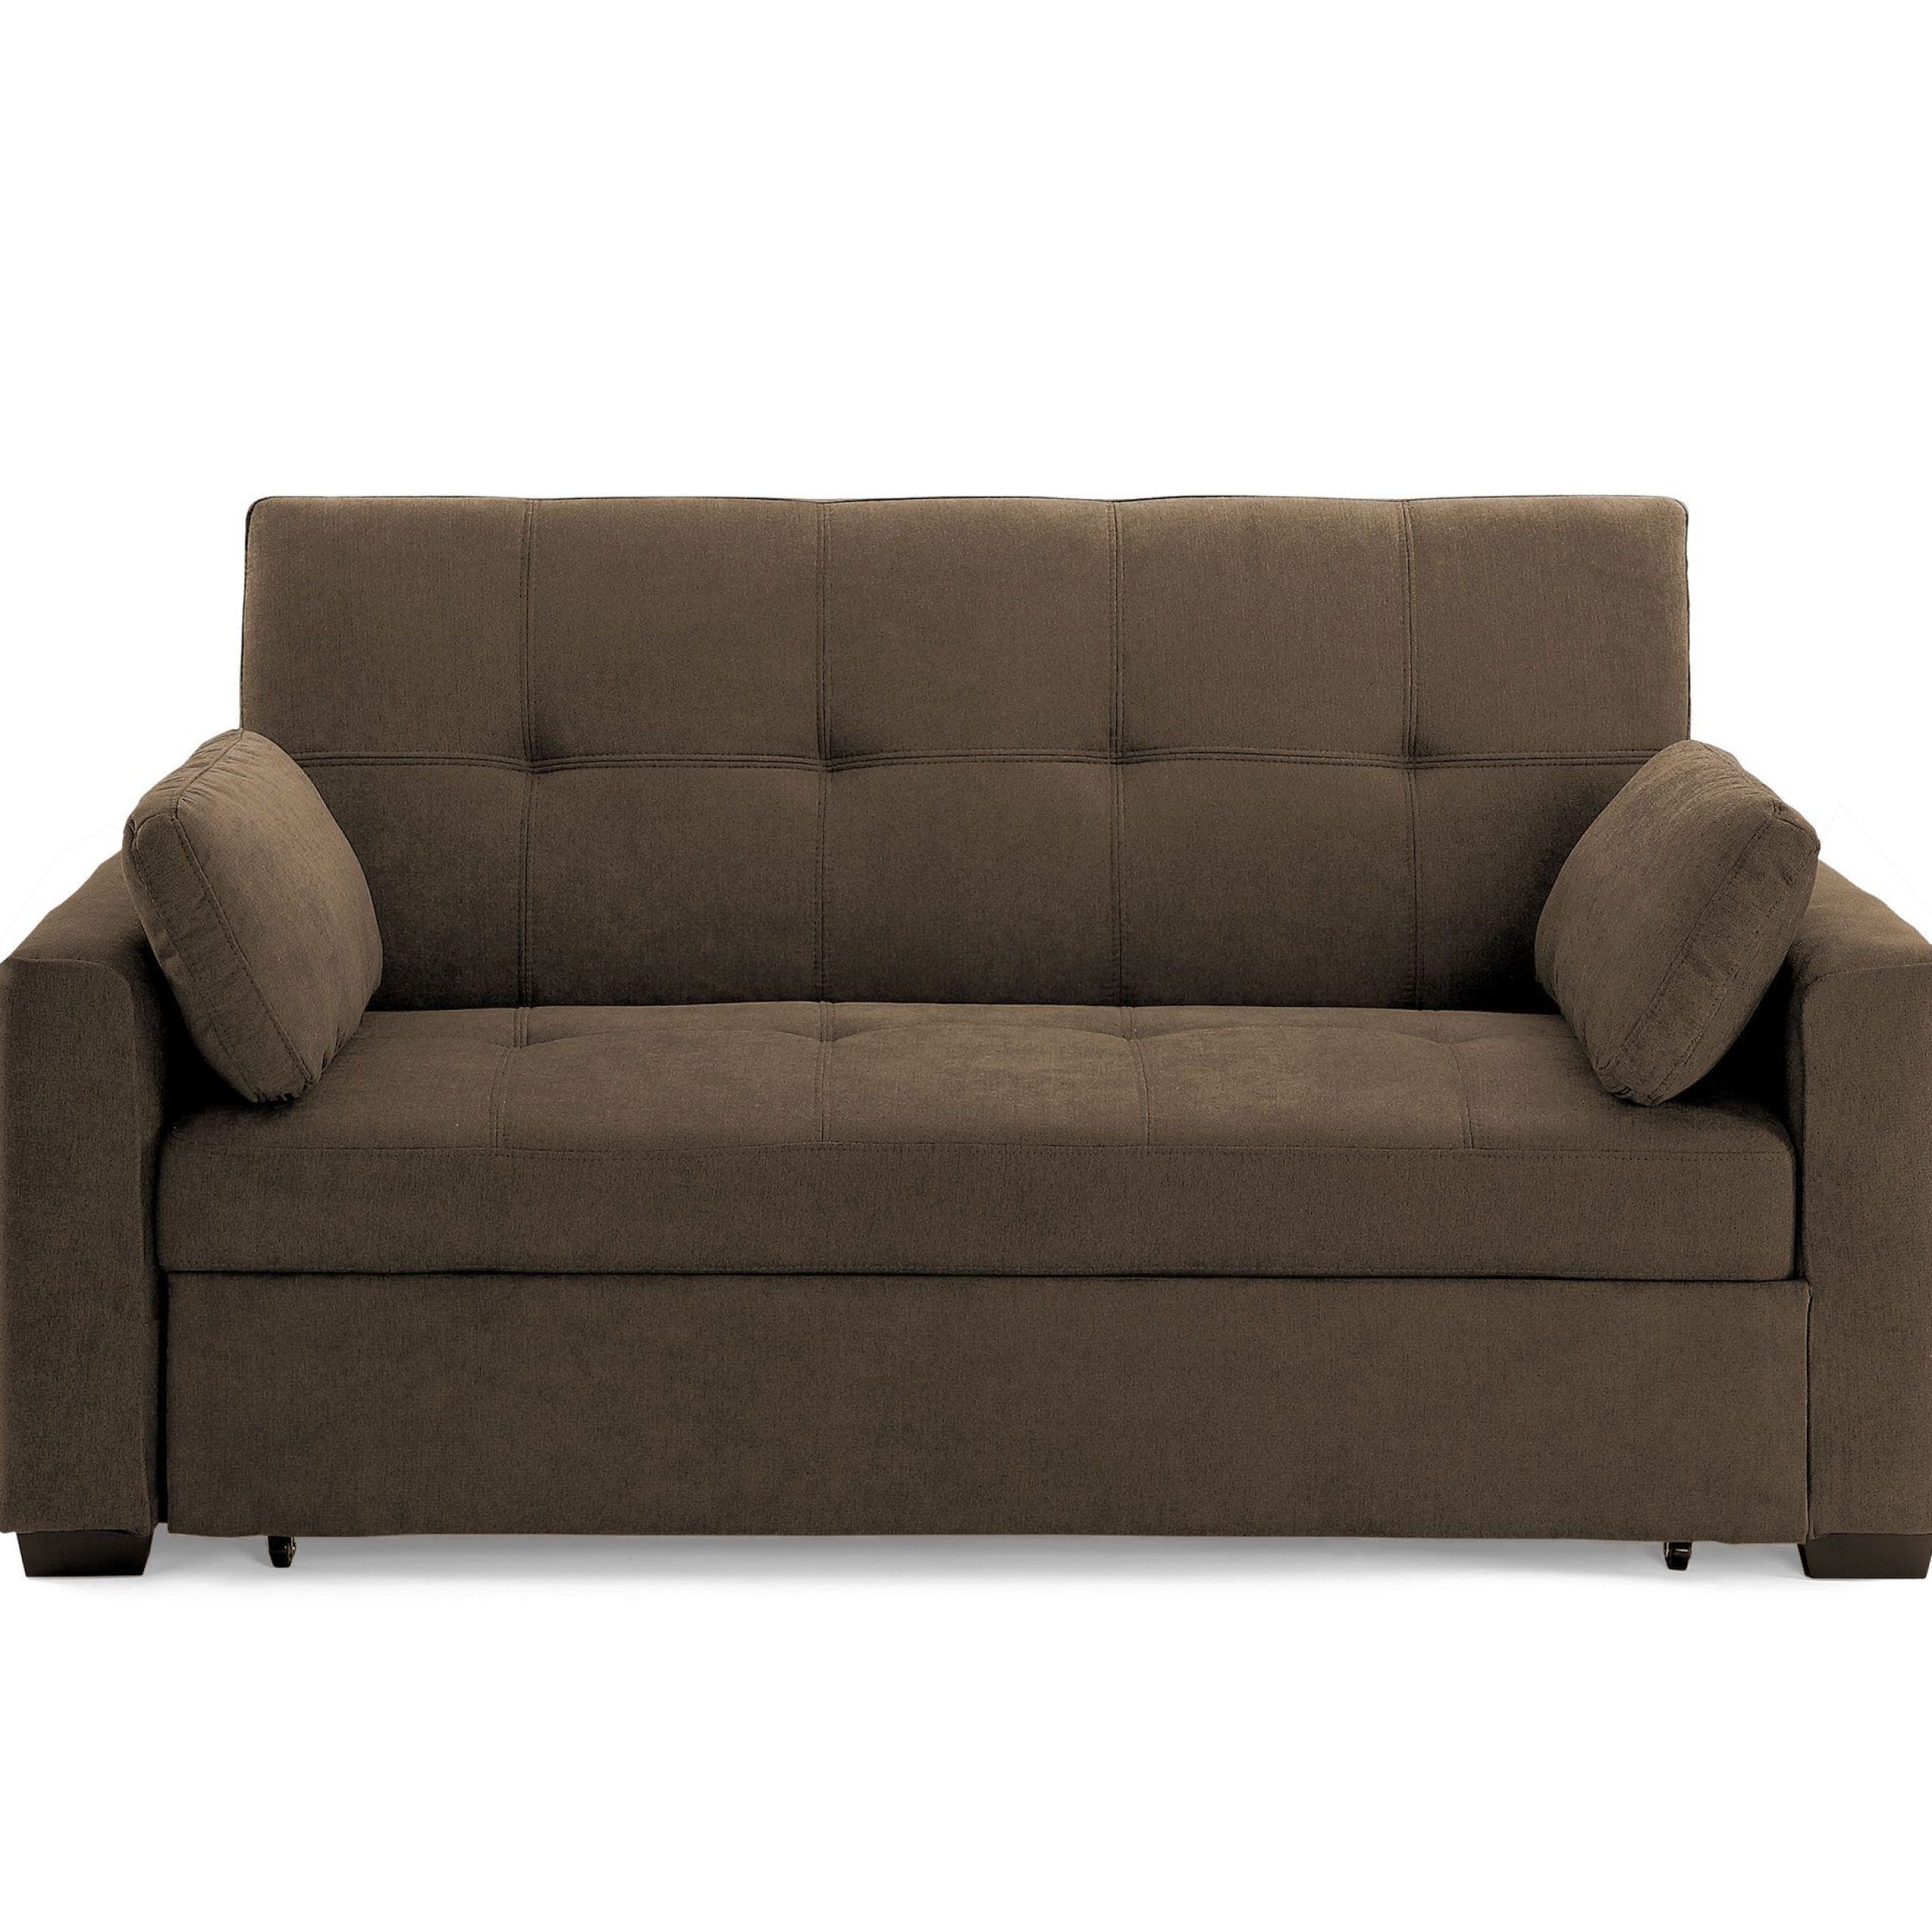 Queen Size Convertible Sofa Bed | Edtnaerca With Queen Size Convertible Sofa Beds (View 17 of 20)